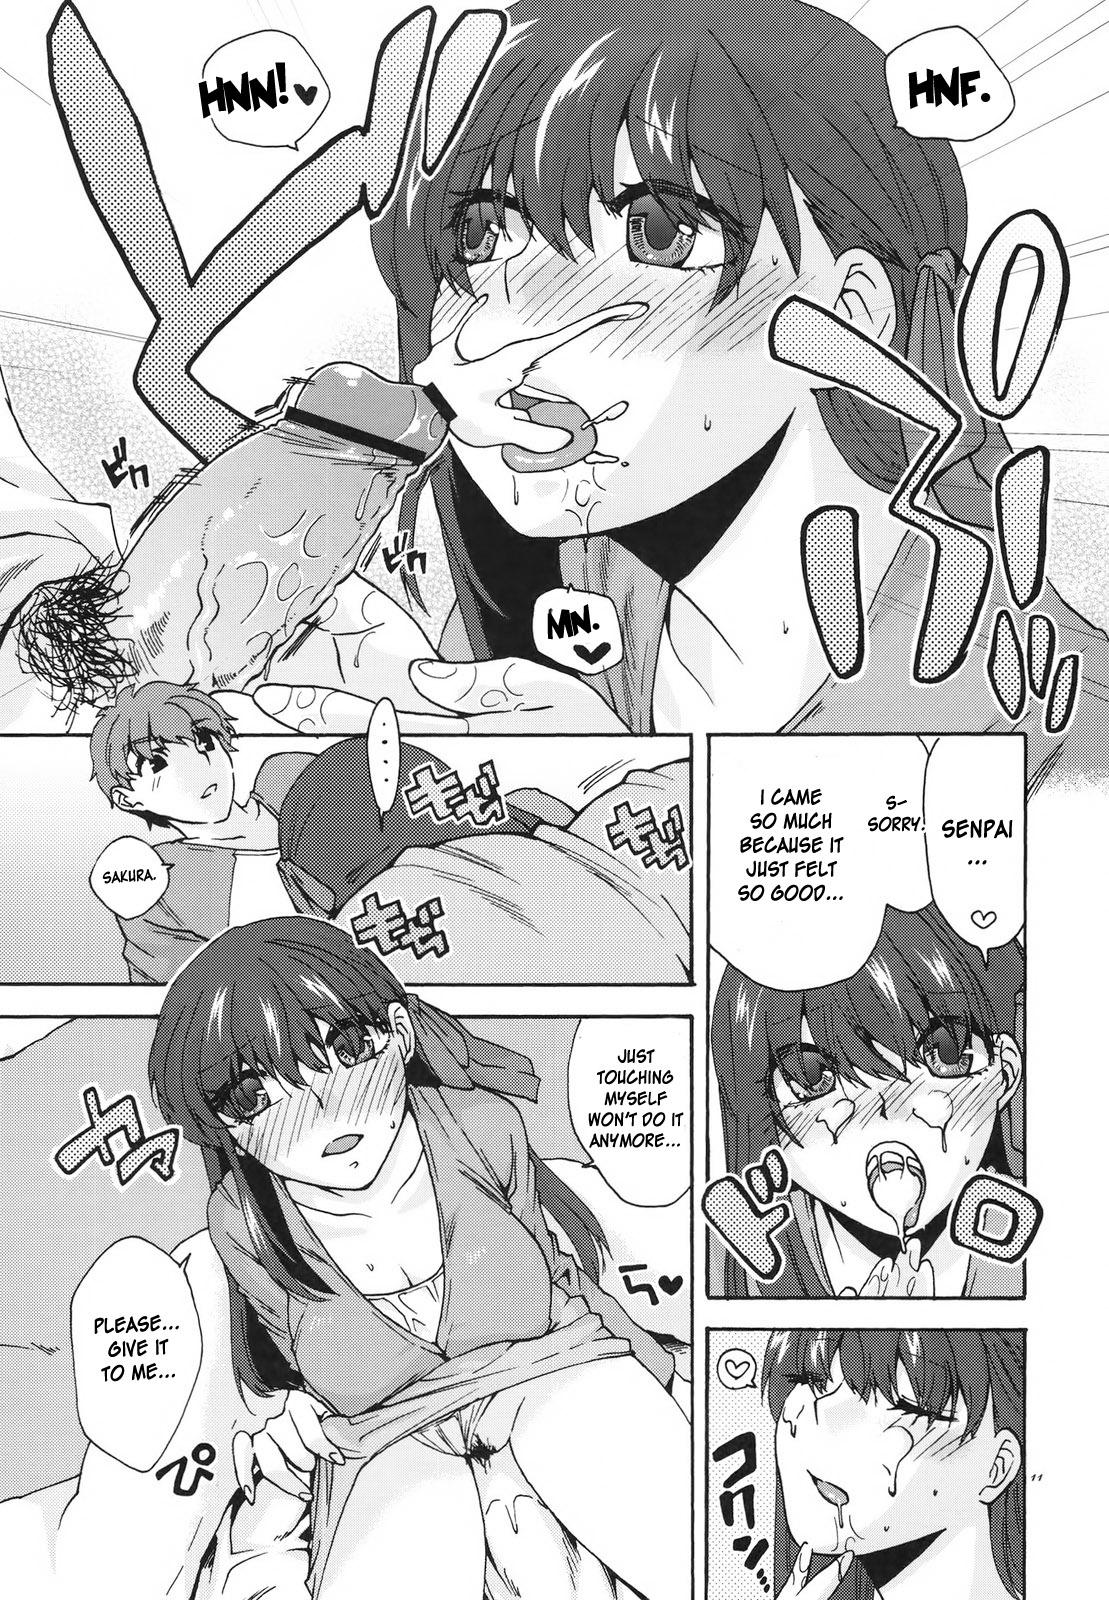 Kinky Crime and Affection - Fate stay night Ass - Page 11